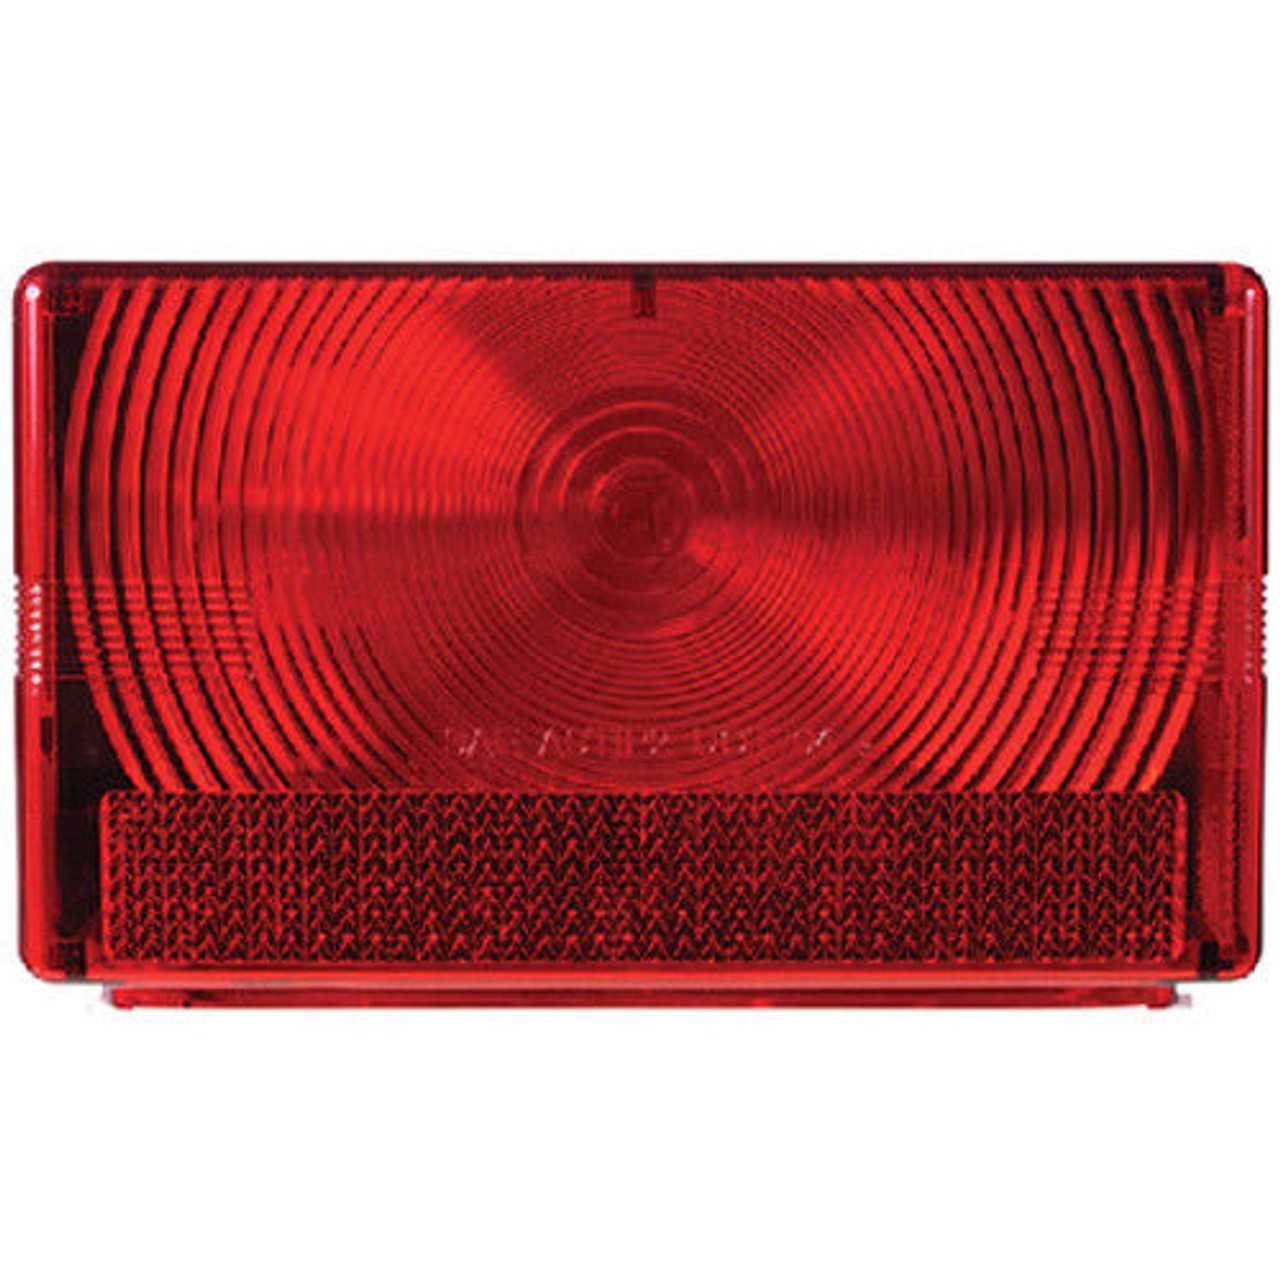 Right Side 6 Function Waterproof Over 80 Inch Wide Boat Trailer Tail Light